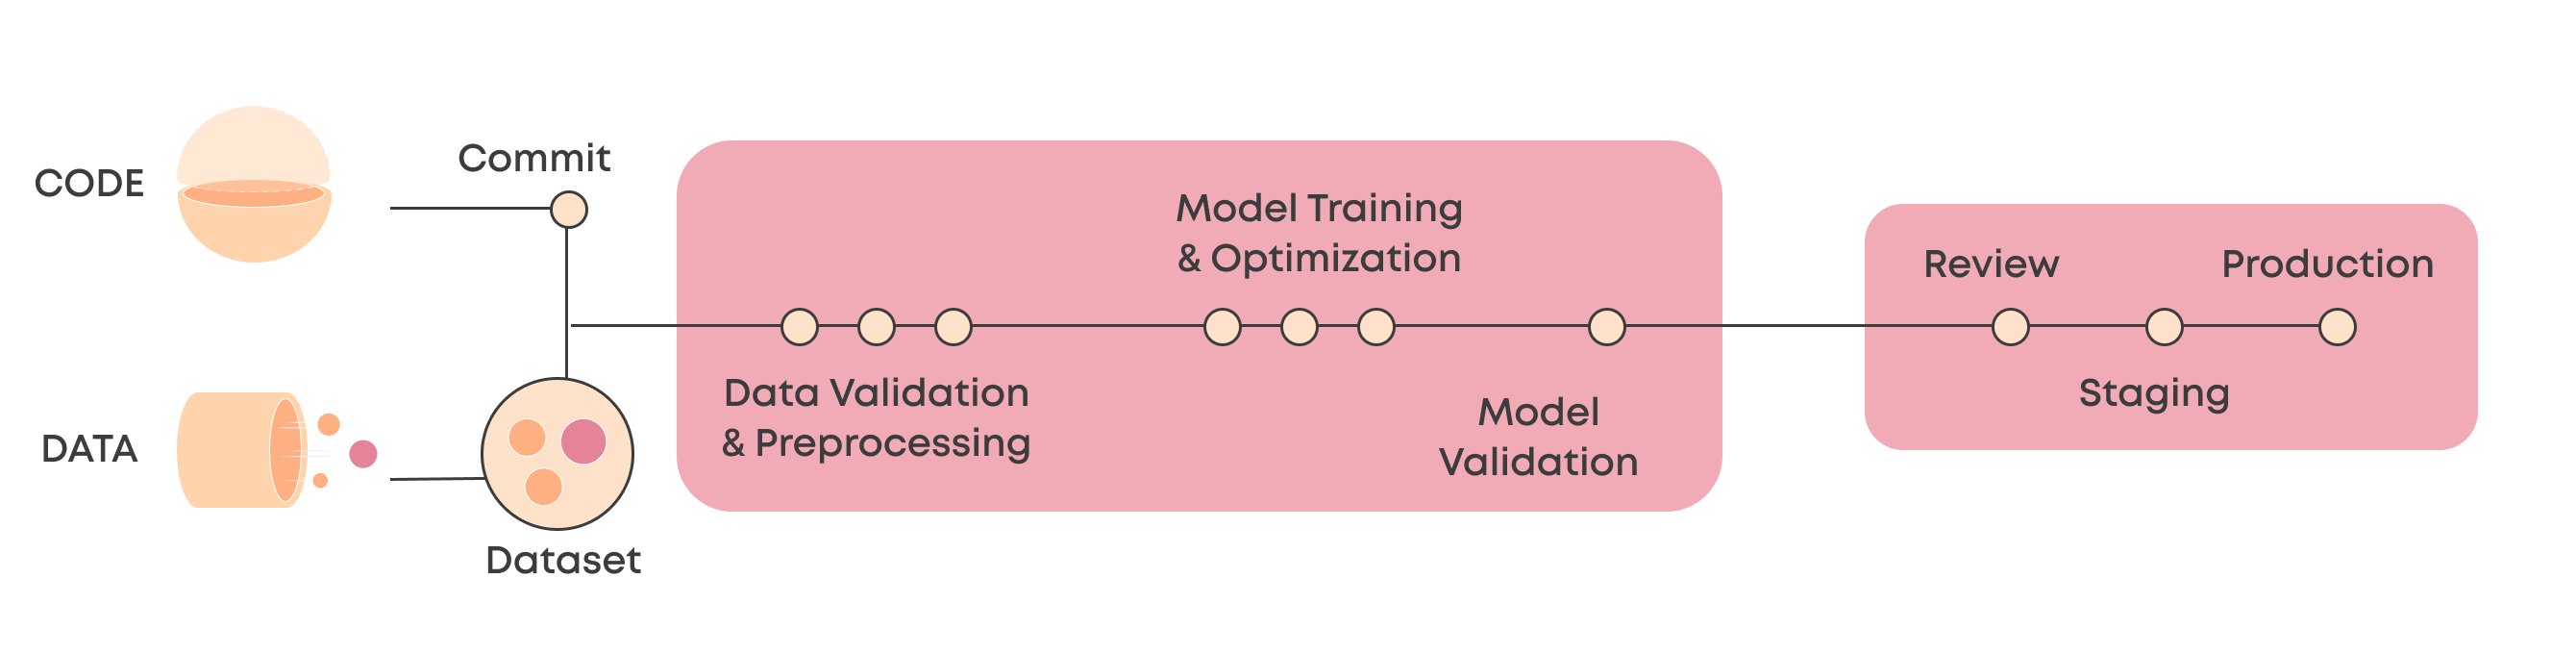 A typical CI/CD system for machine learning with continuous training